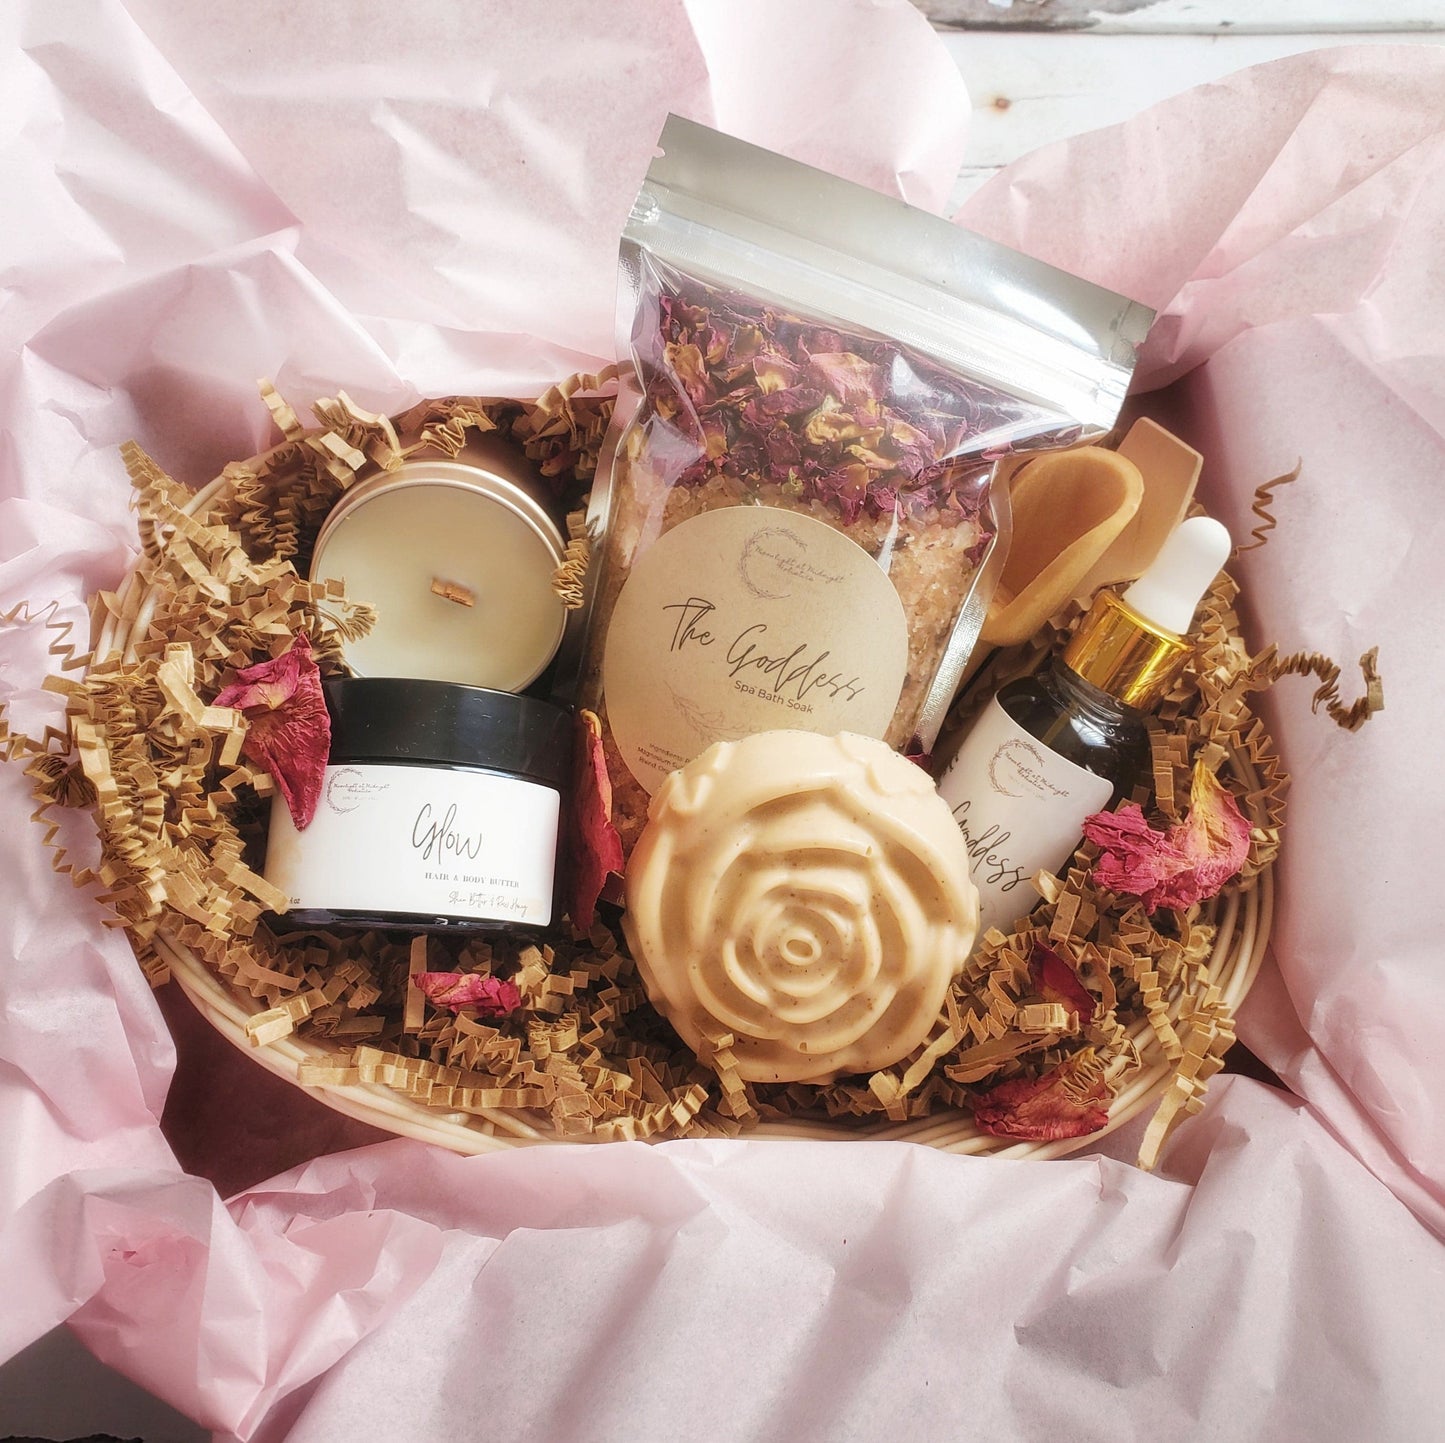 GODDESS Spa Gift Basket | Self-Care Gift Set | Organic Skin Care for Spa Day at Home | Rose Aromatherapy